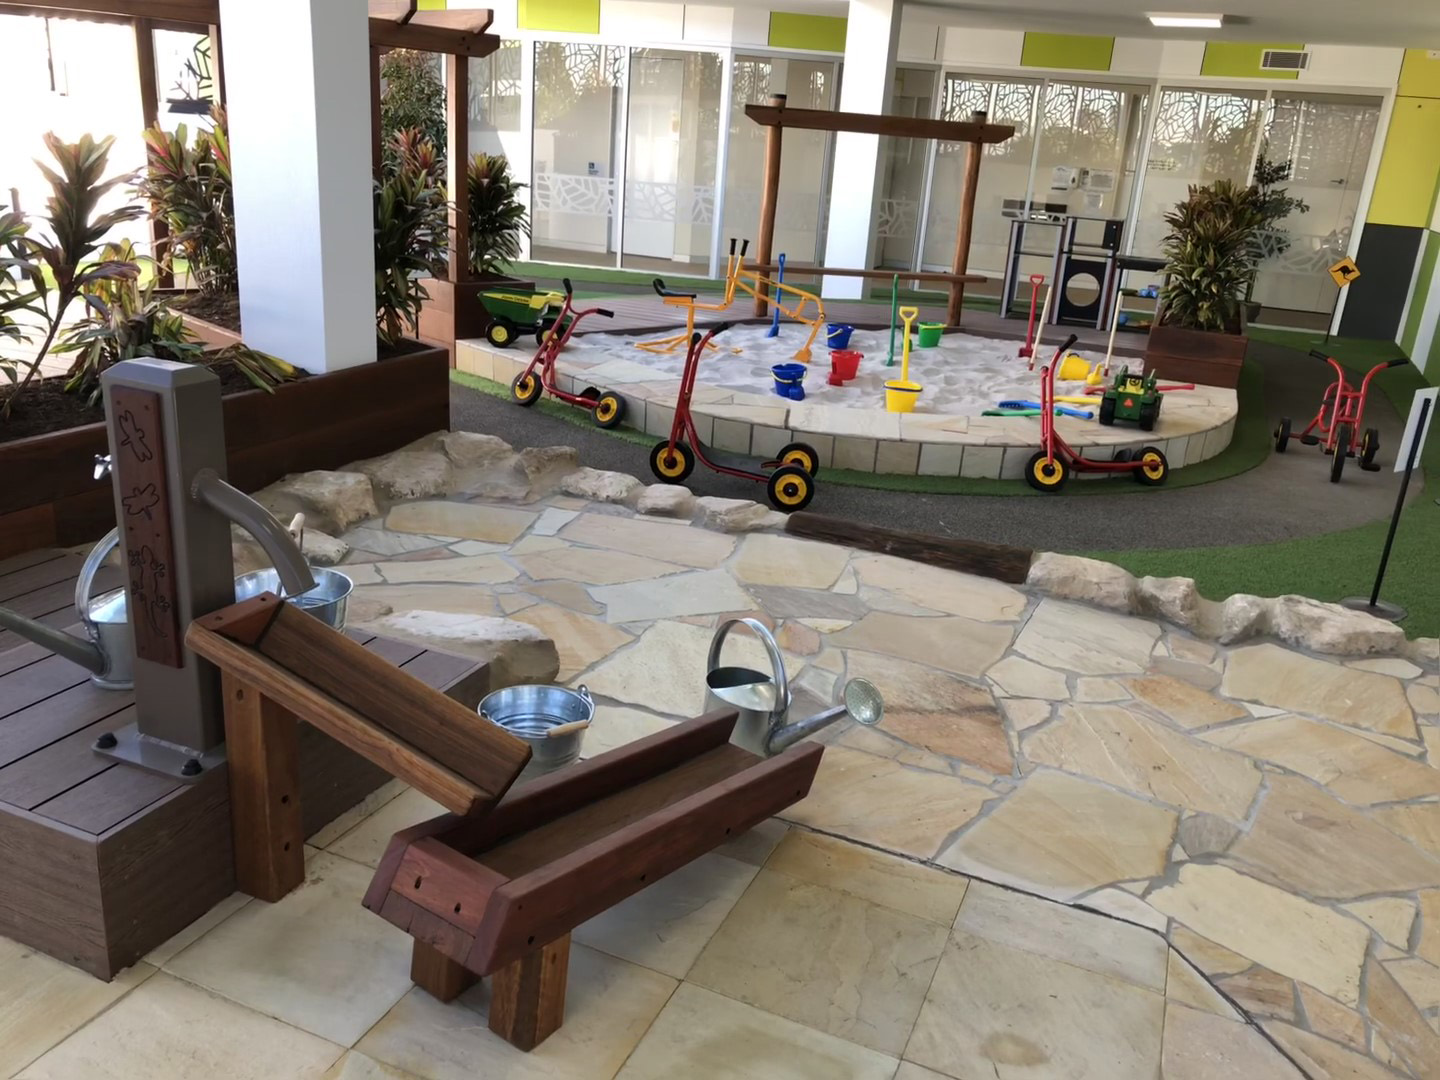 Outdoor area at Milton Edge Early Learning